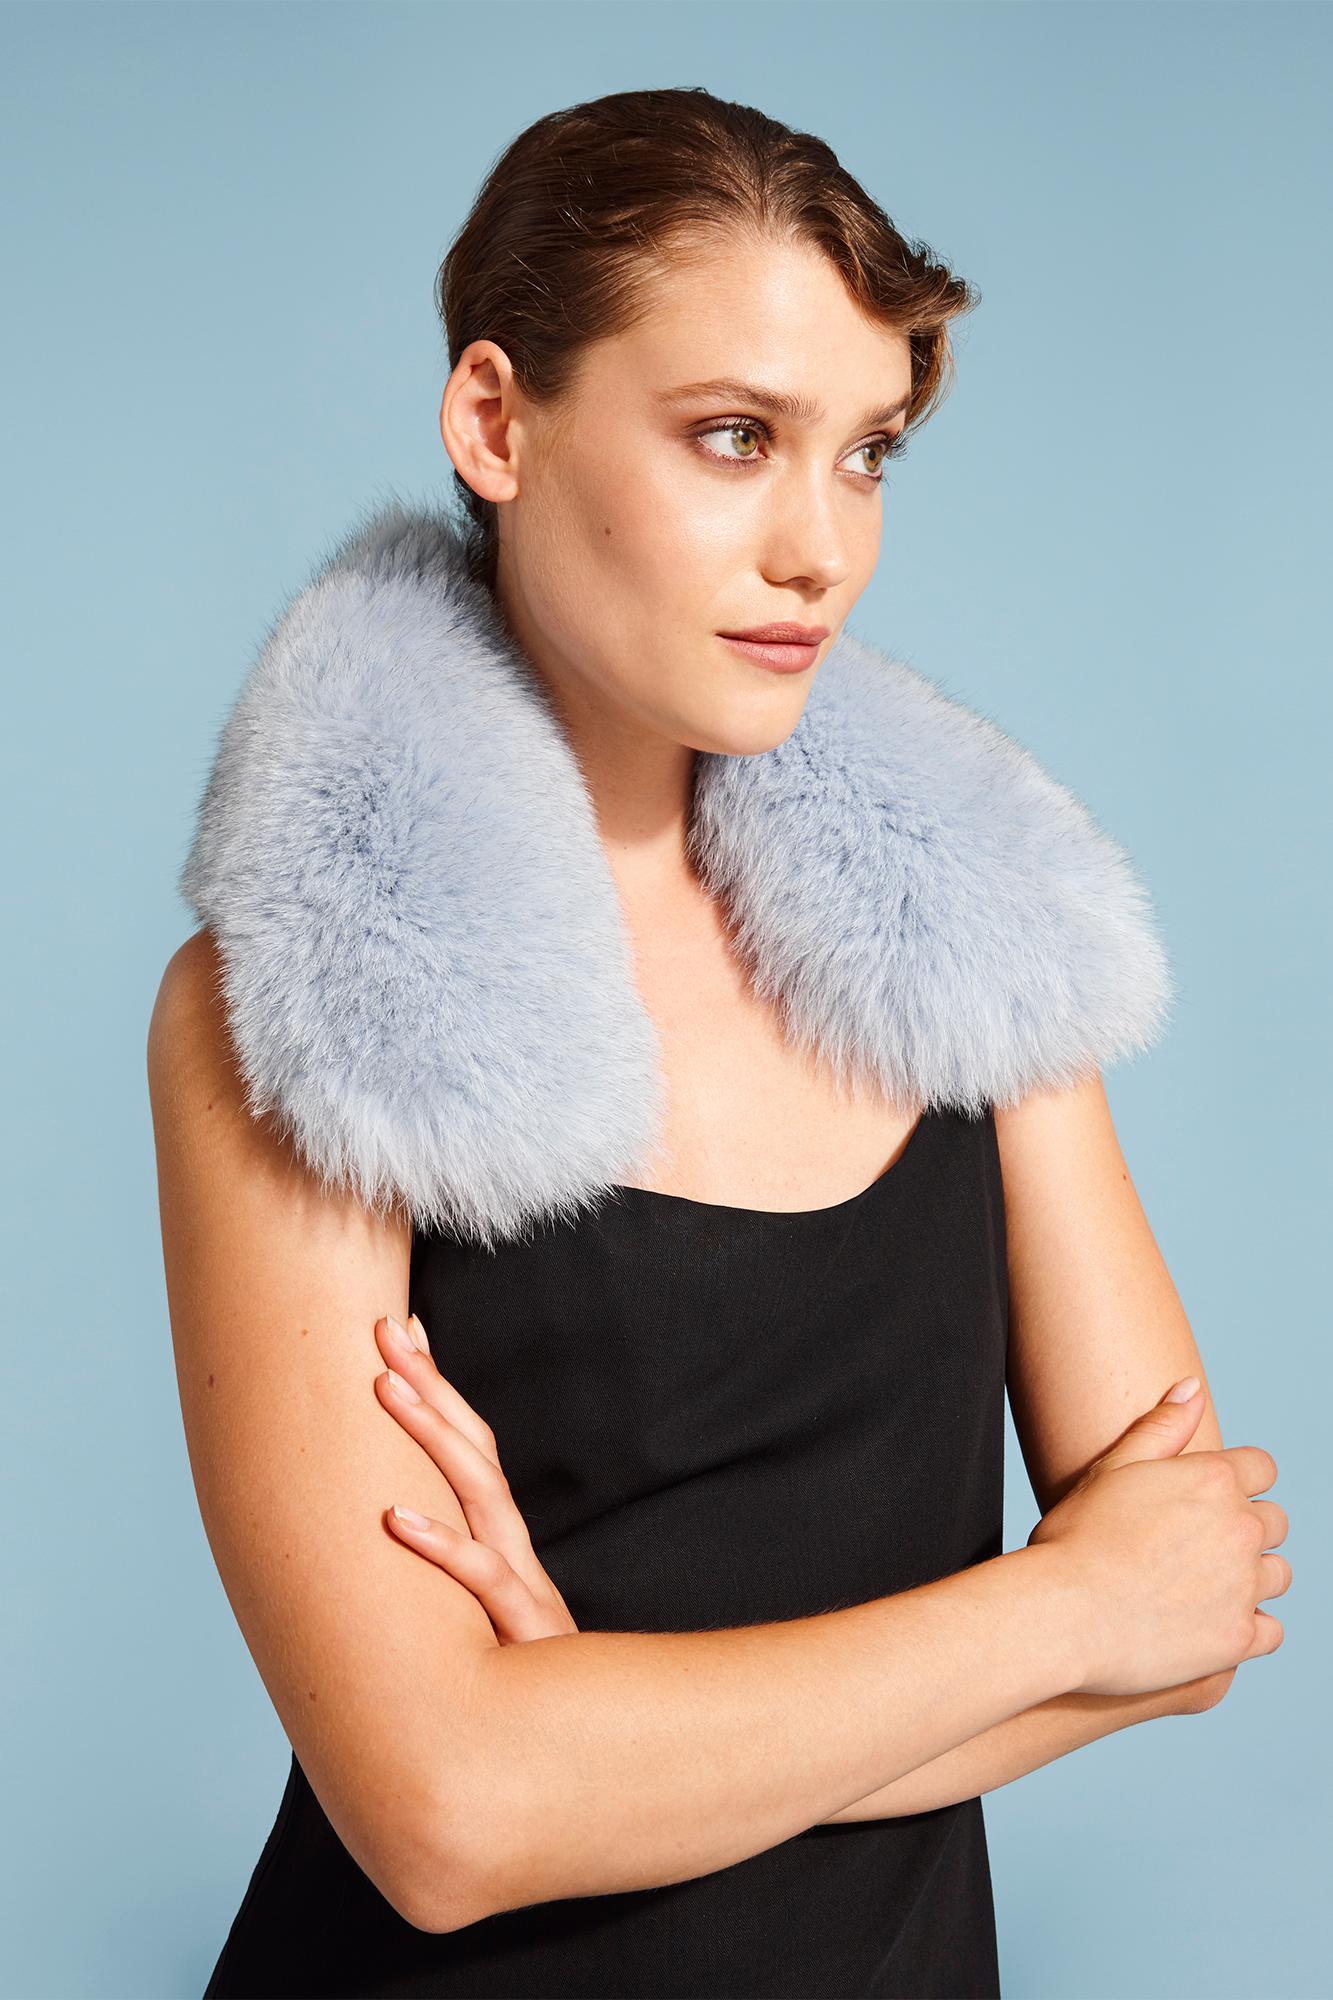 Verheyen London Peter Pan Collar in Iced Blue Fox Fur - Brand New (RRP Price) 

The perfect Christmas gift which can be personally monogrammed on request.  The Peter Pan collar is Verheyen London’s classic staple for effortless style for casual